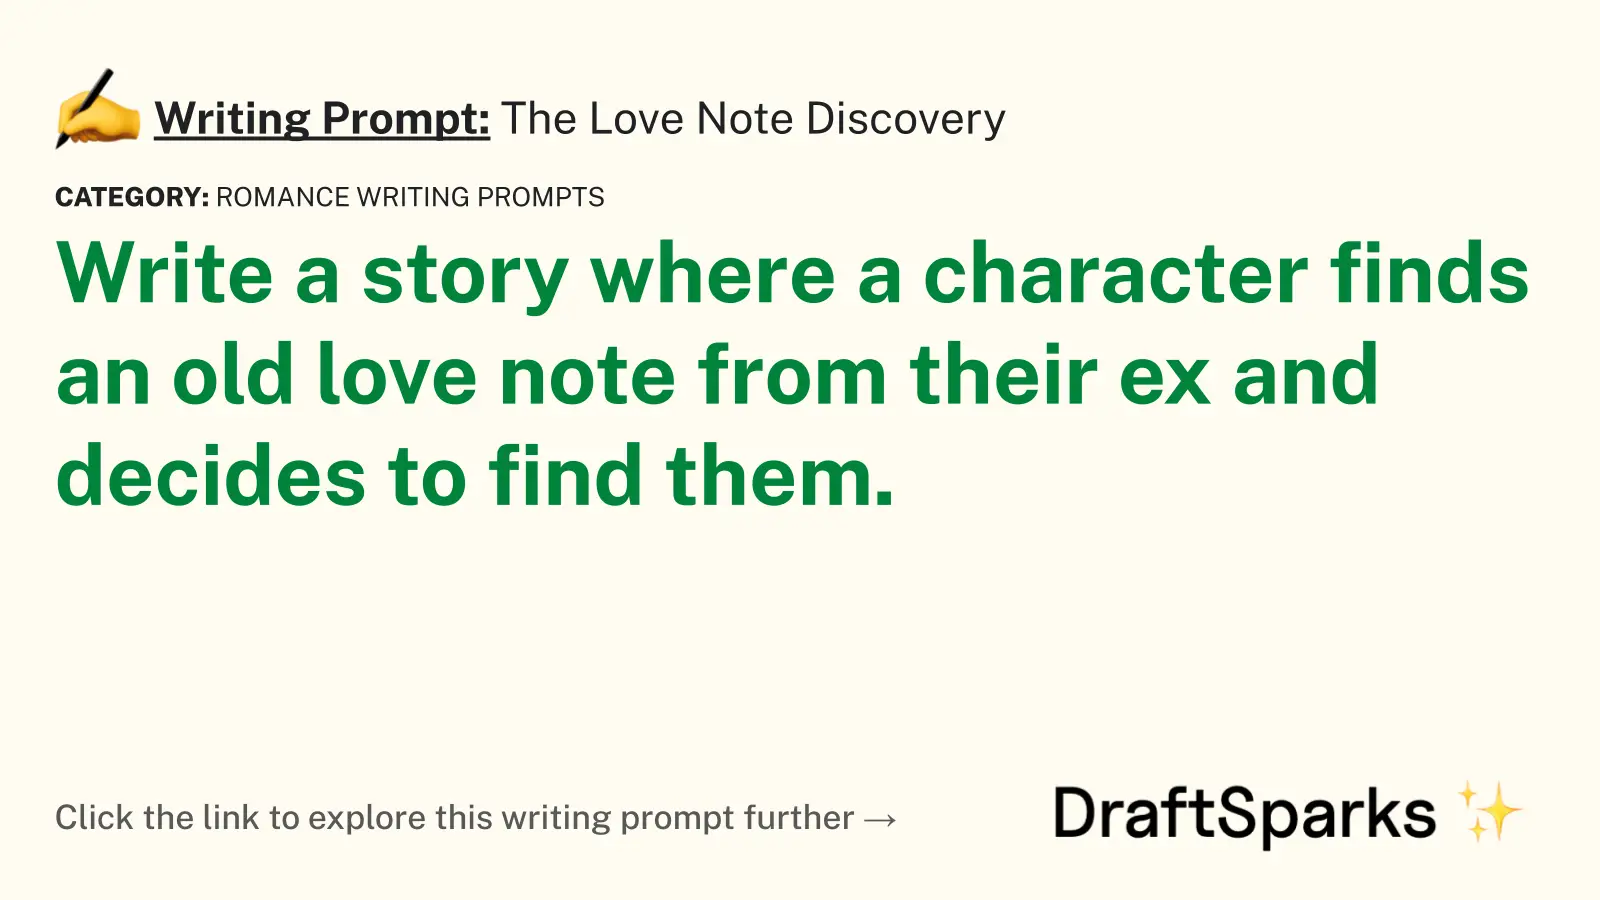 The Love Note Discovery